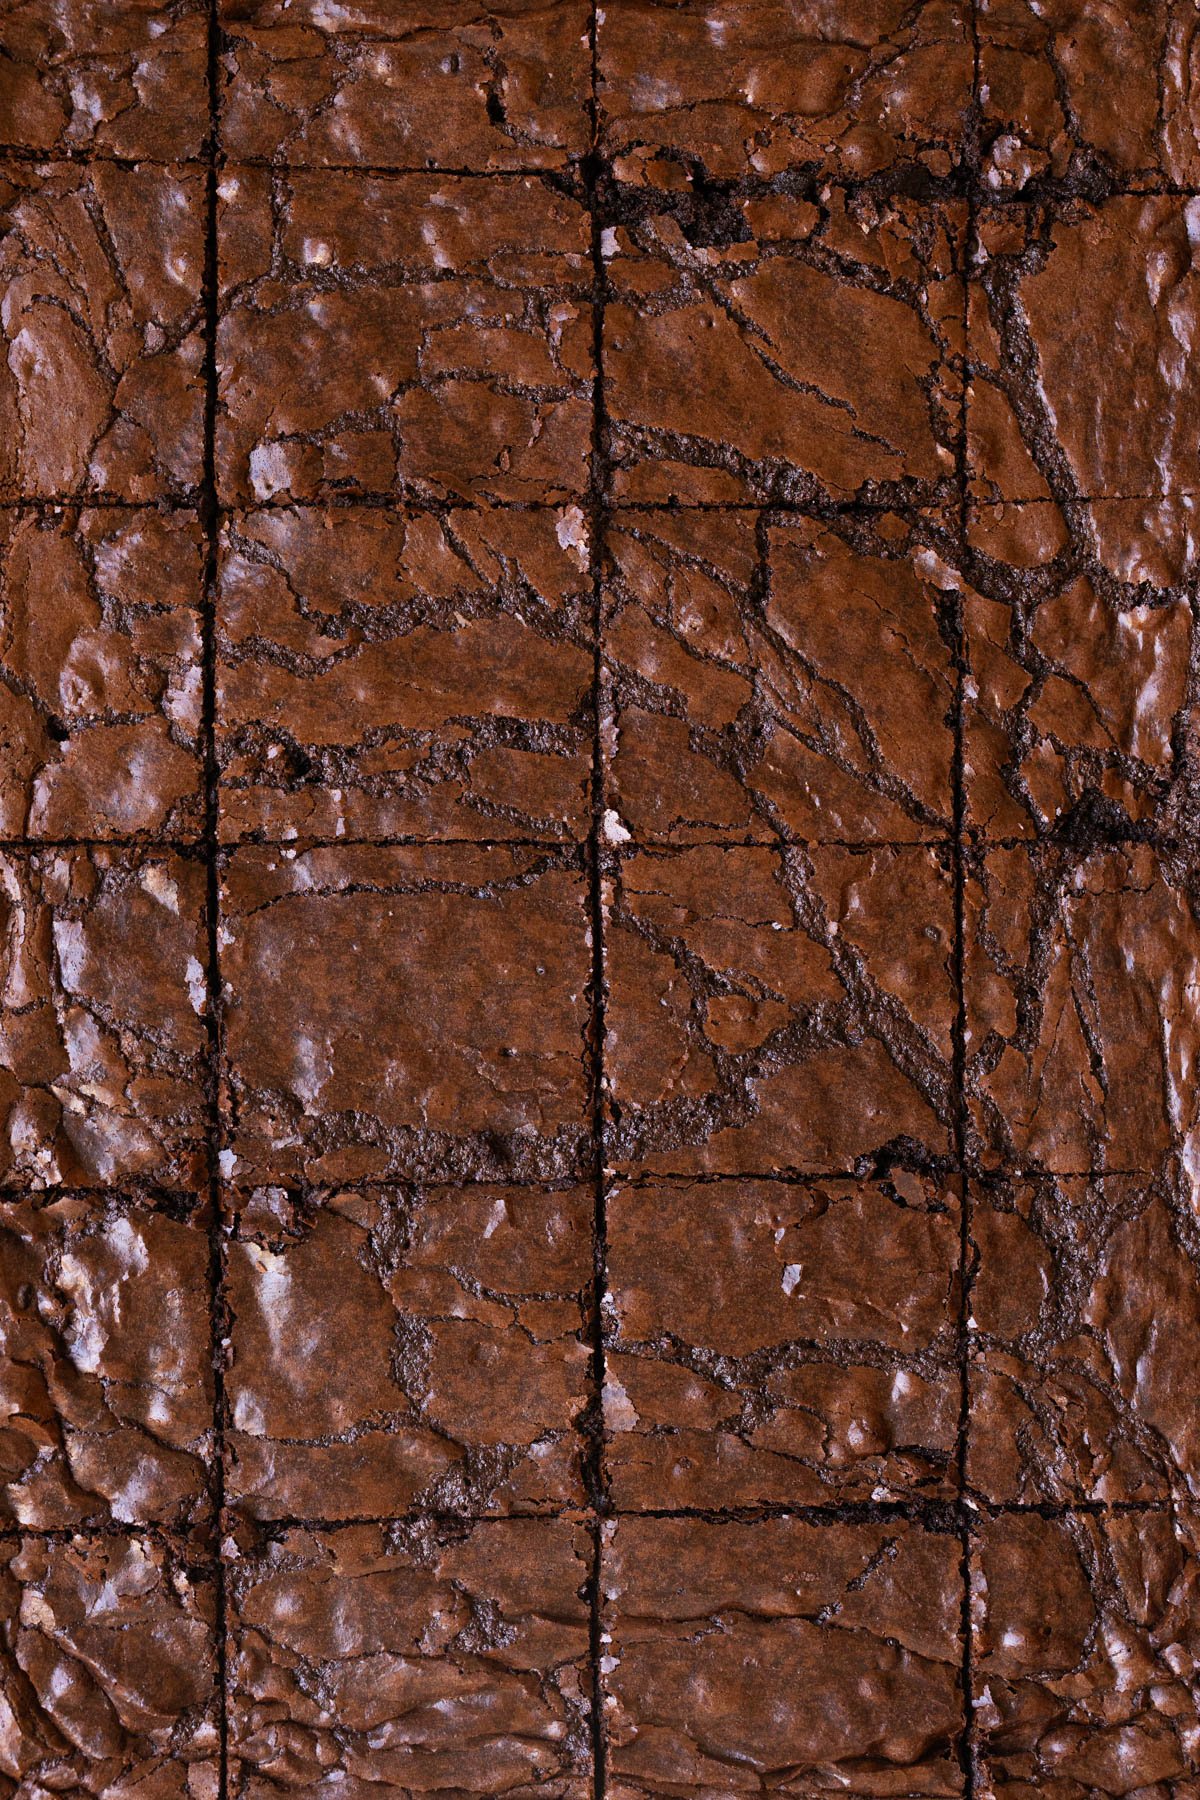 a close up image of brownies cut into squares.